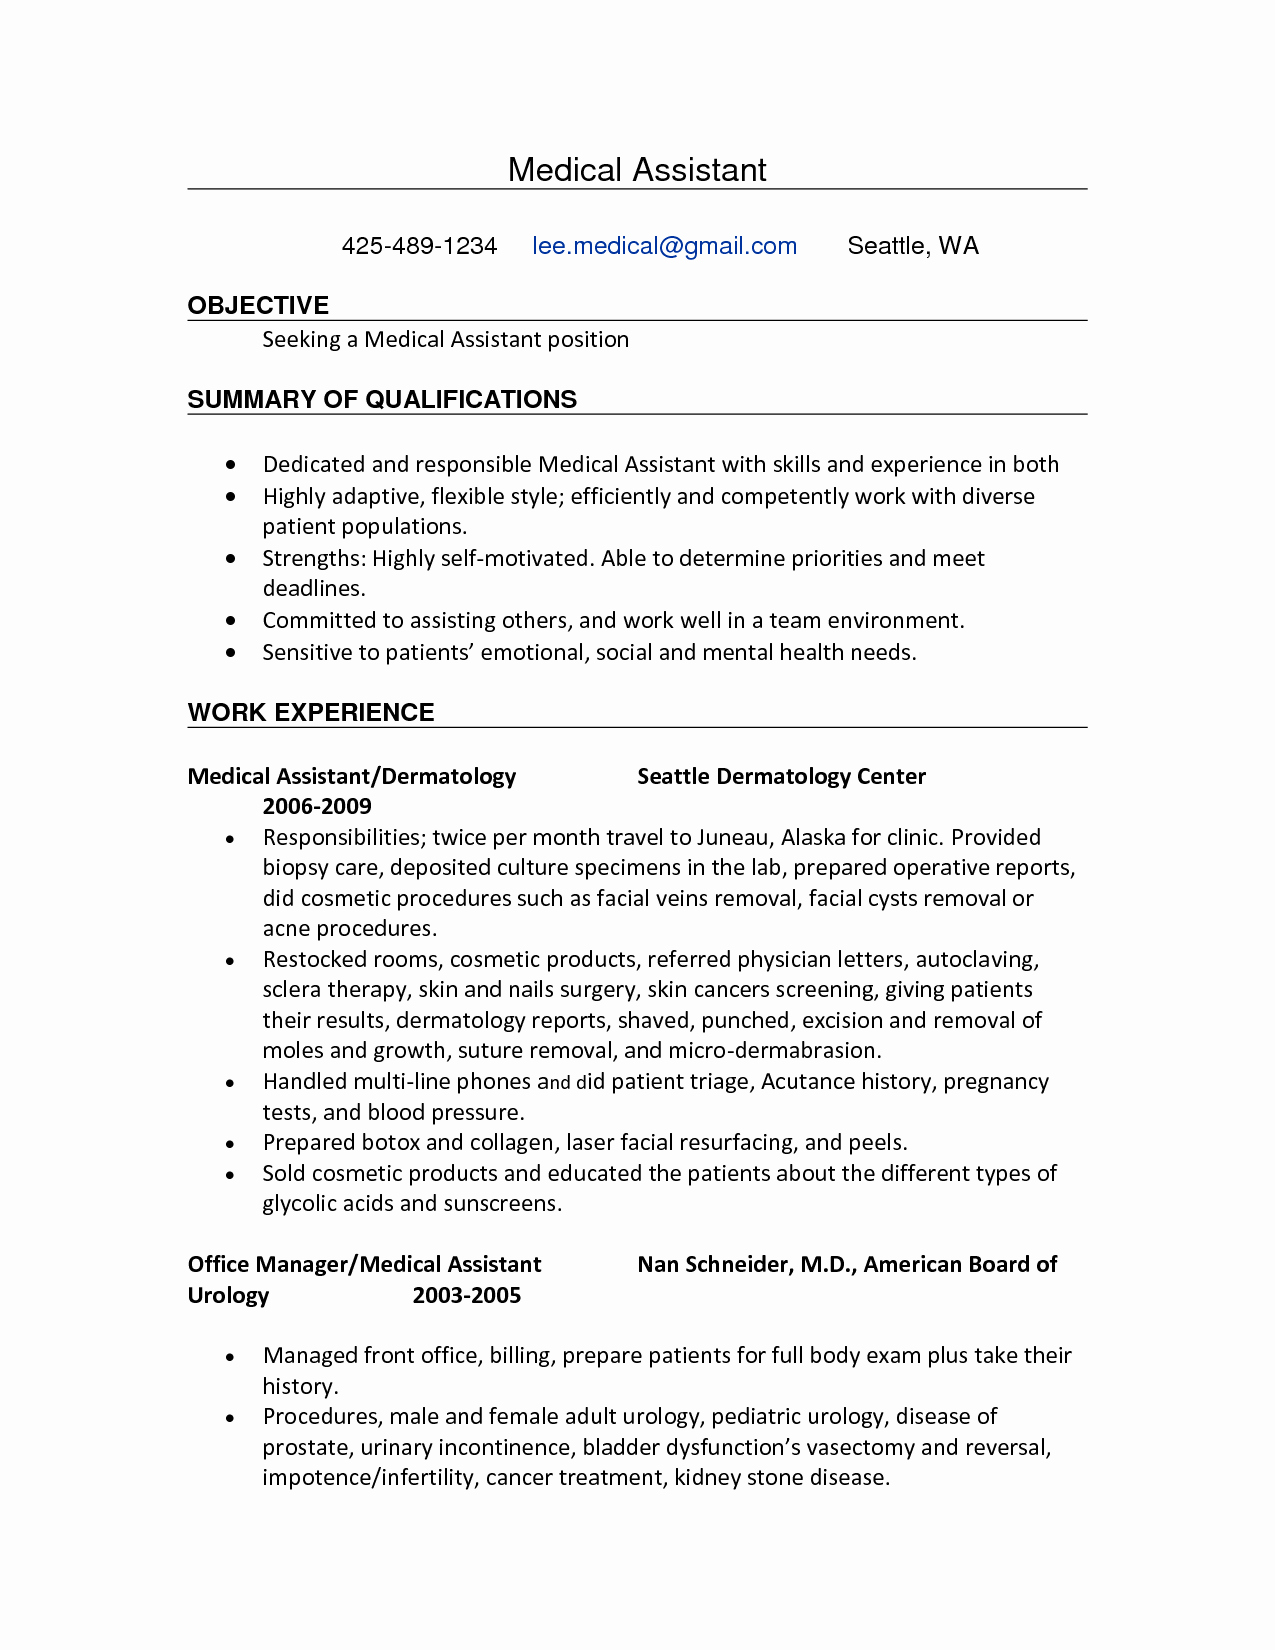 Medical assistant Resume Template Free Clinical Skills